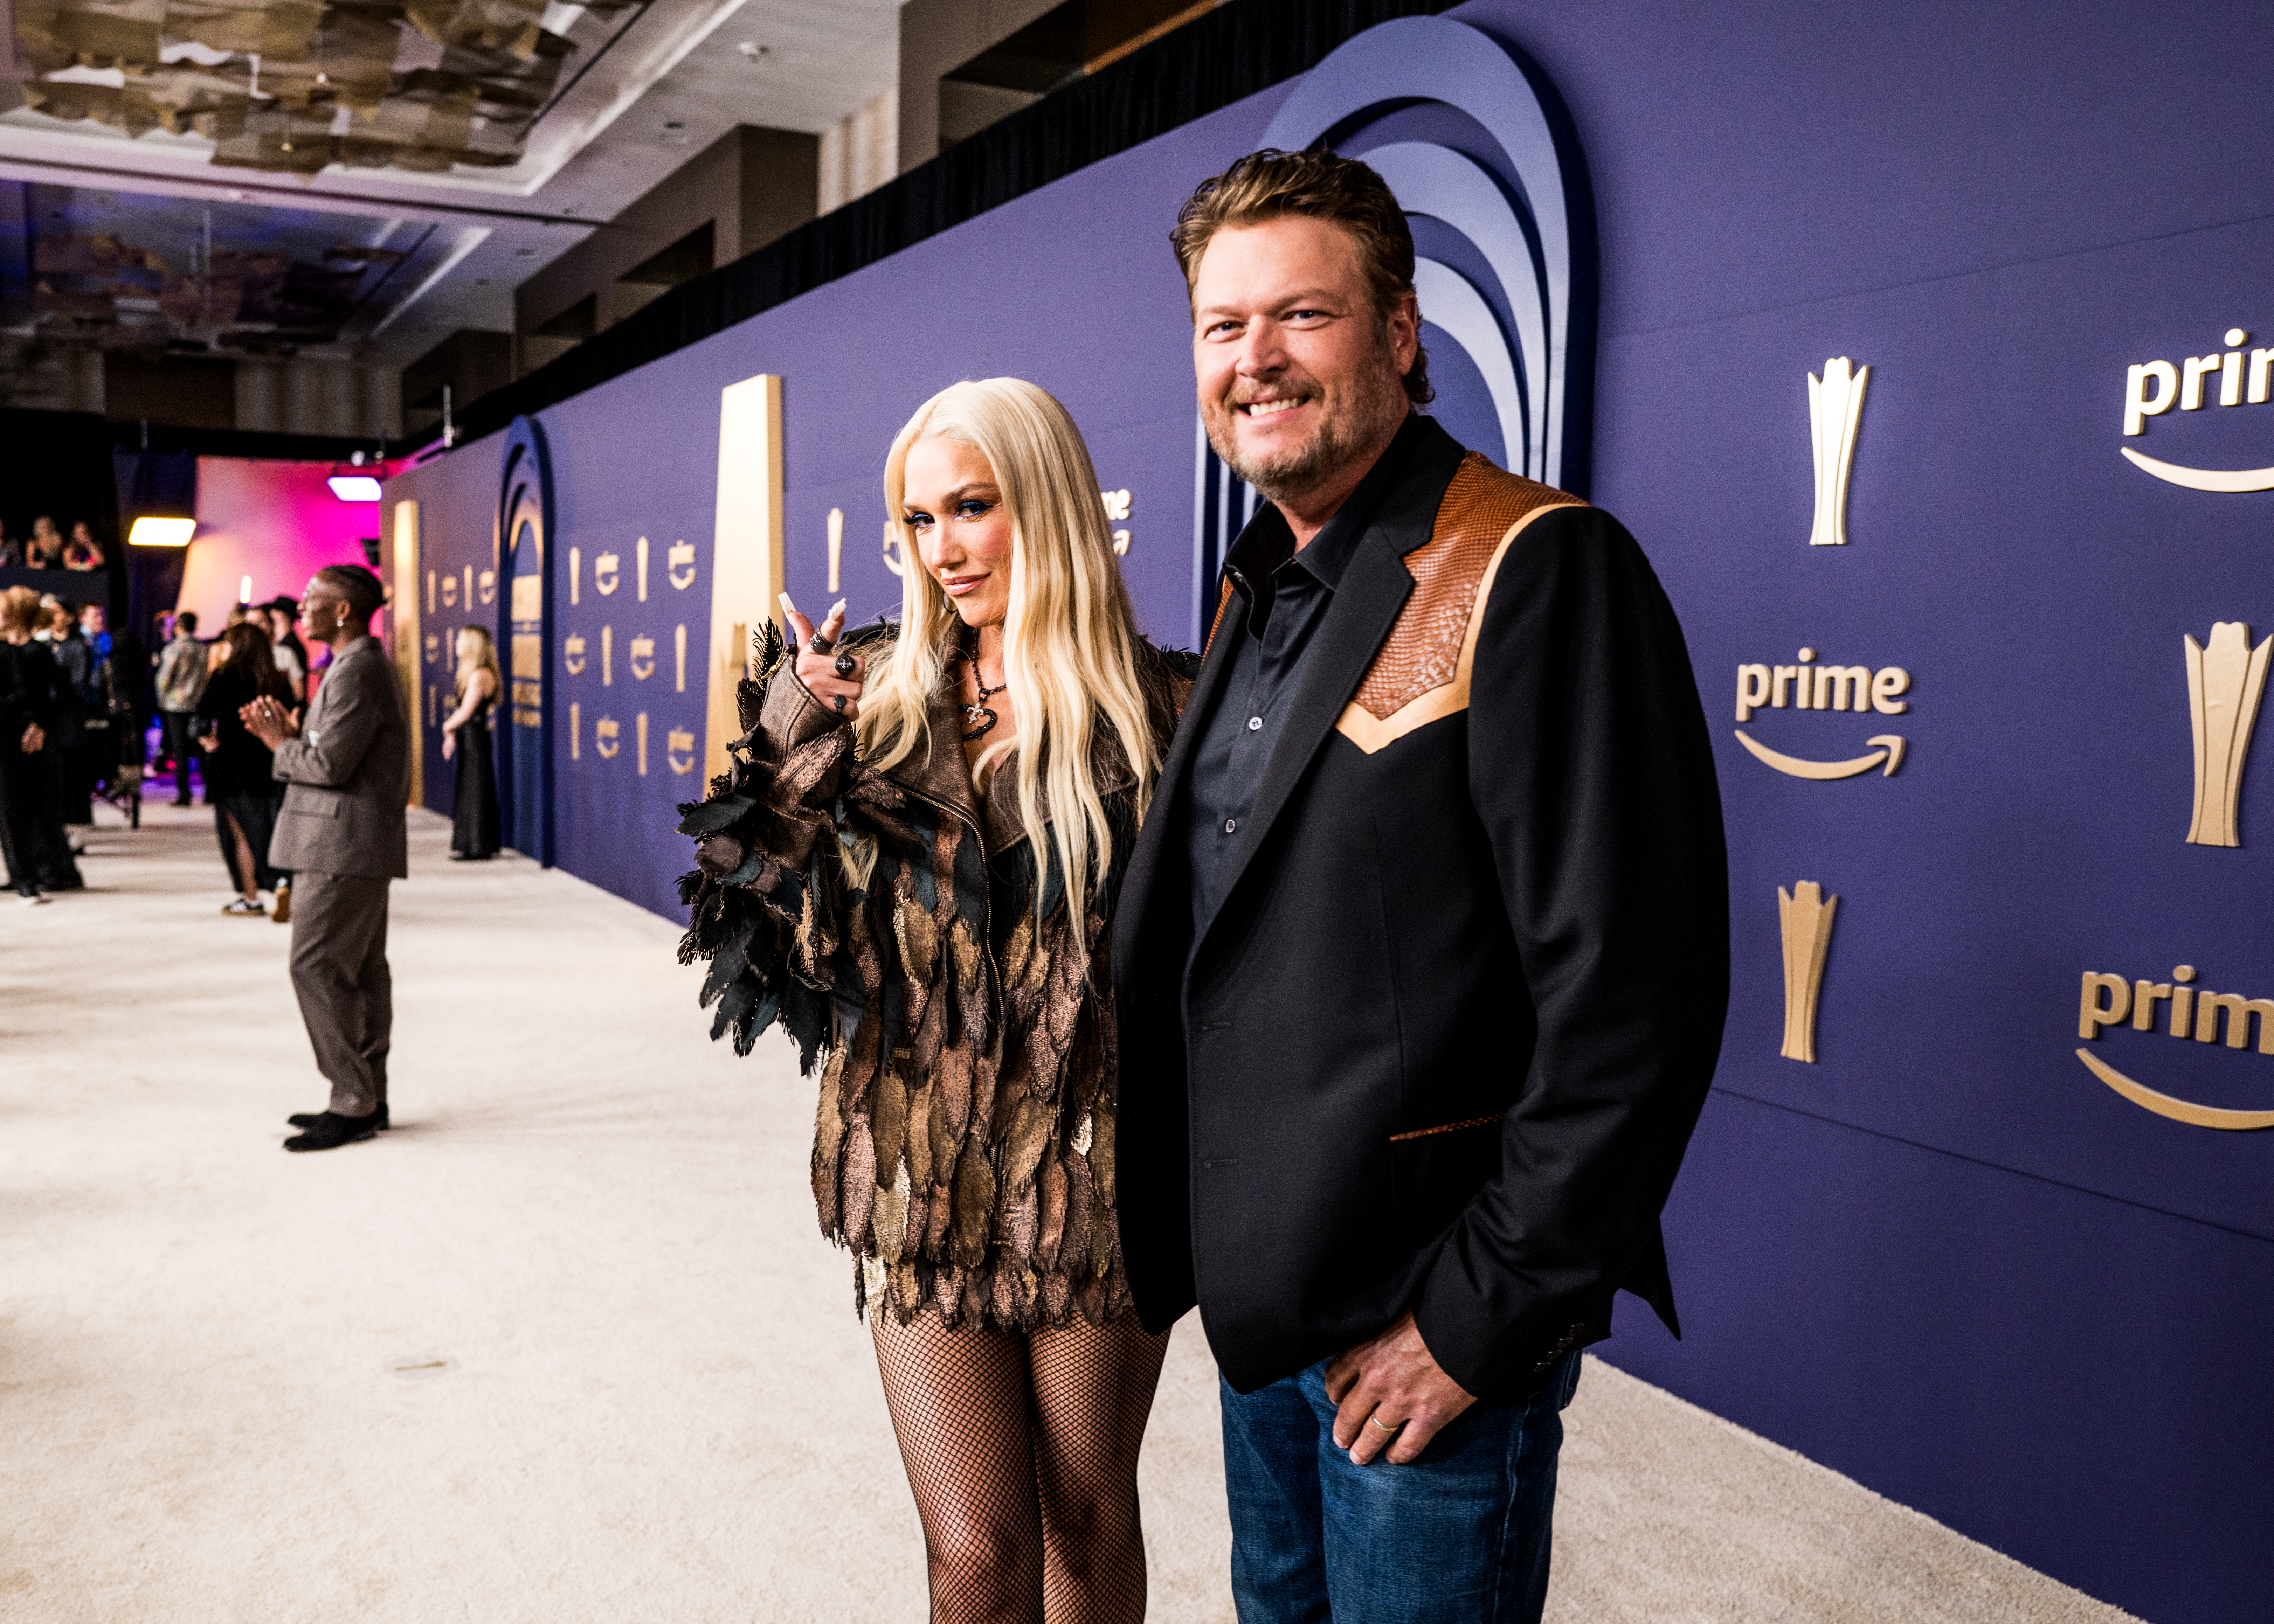 Fans joked that 'someone should check on Blake Shelton' after seeing the racy outfit